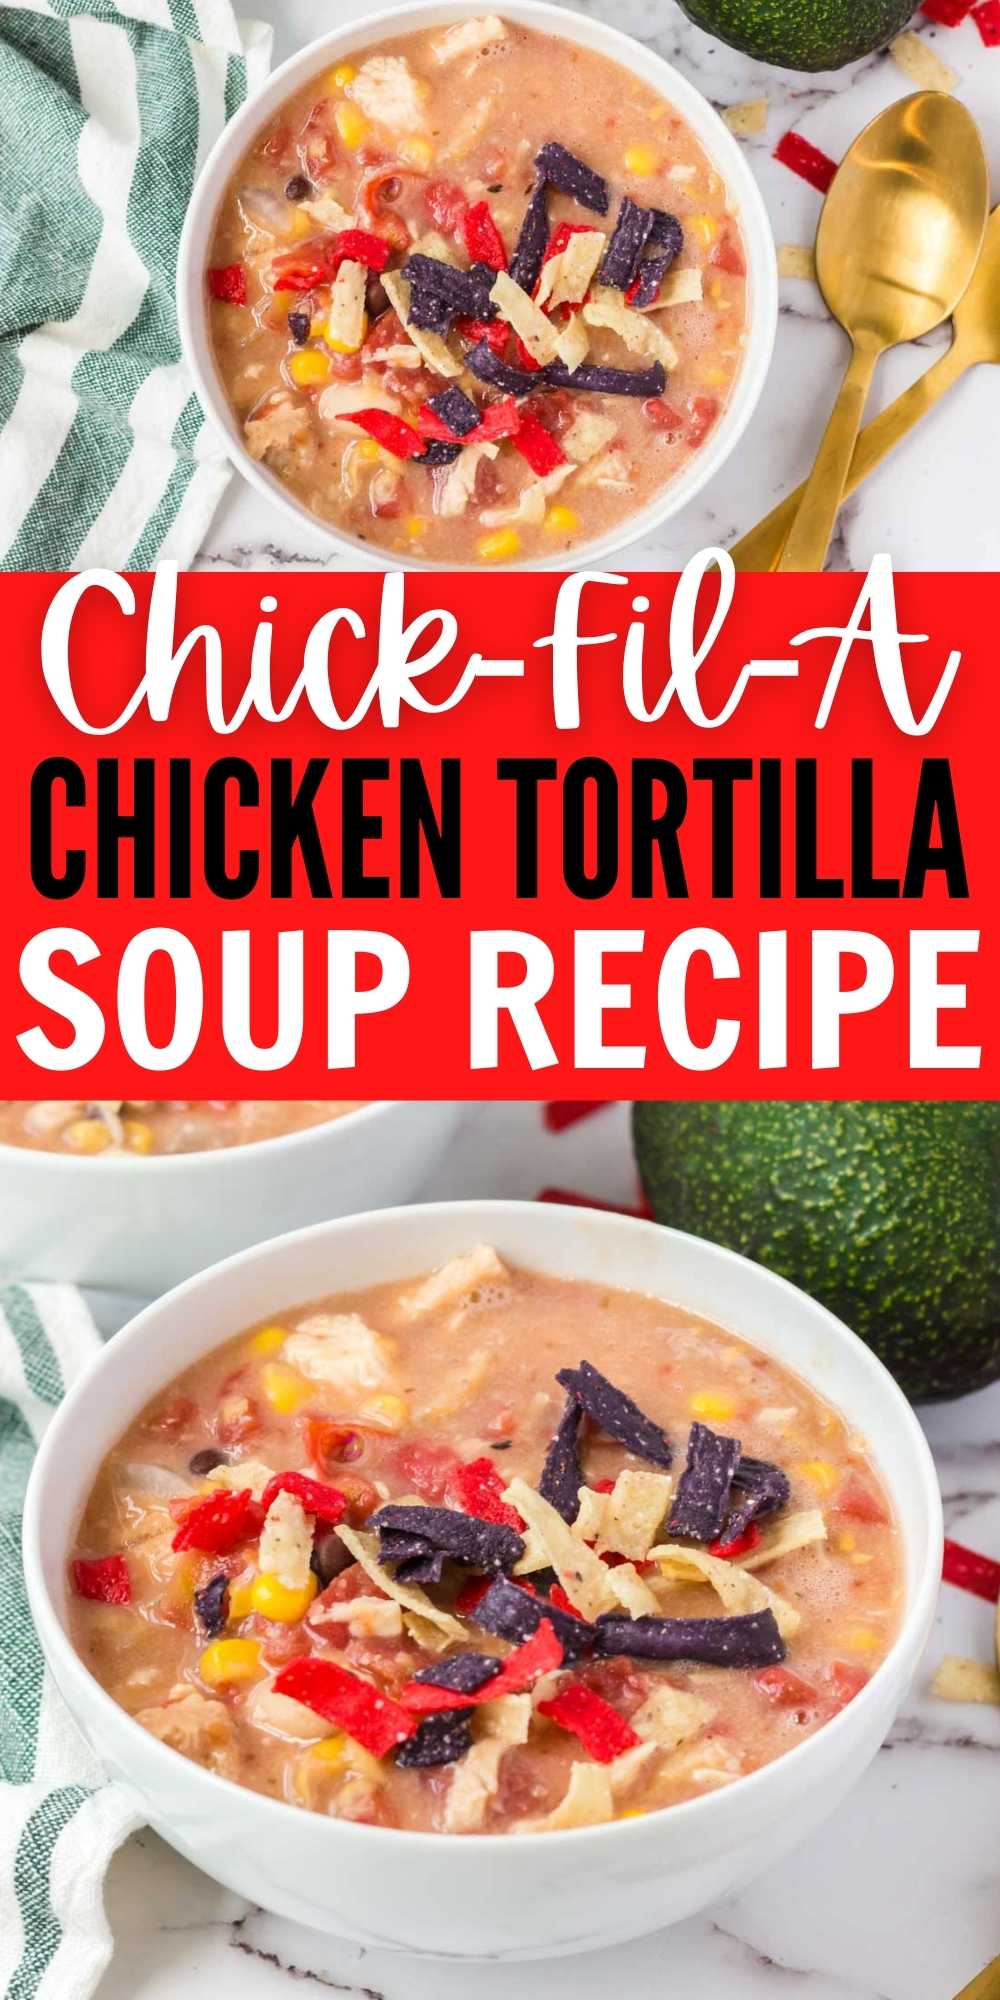 Chick-fil-a Chicken Tortilla Soup Recipe - Eating on a Dime